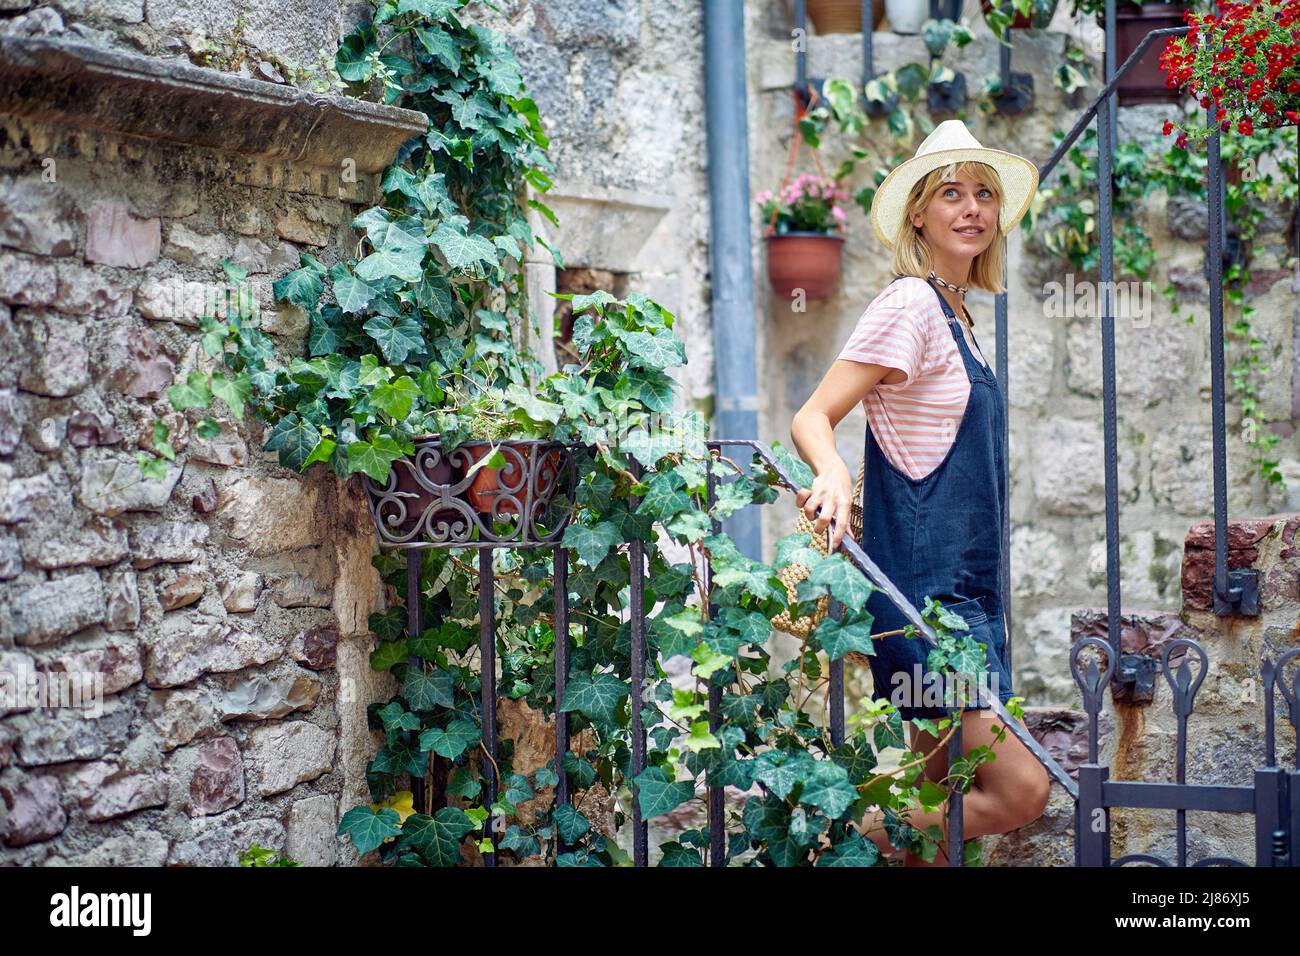 Young blonde woman in summer denim dress and hat walking down stairs grown around by plants. Old European city. Travel, holiday, fashion, lifestyle co Stock Photo